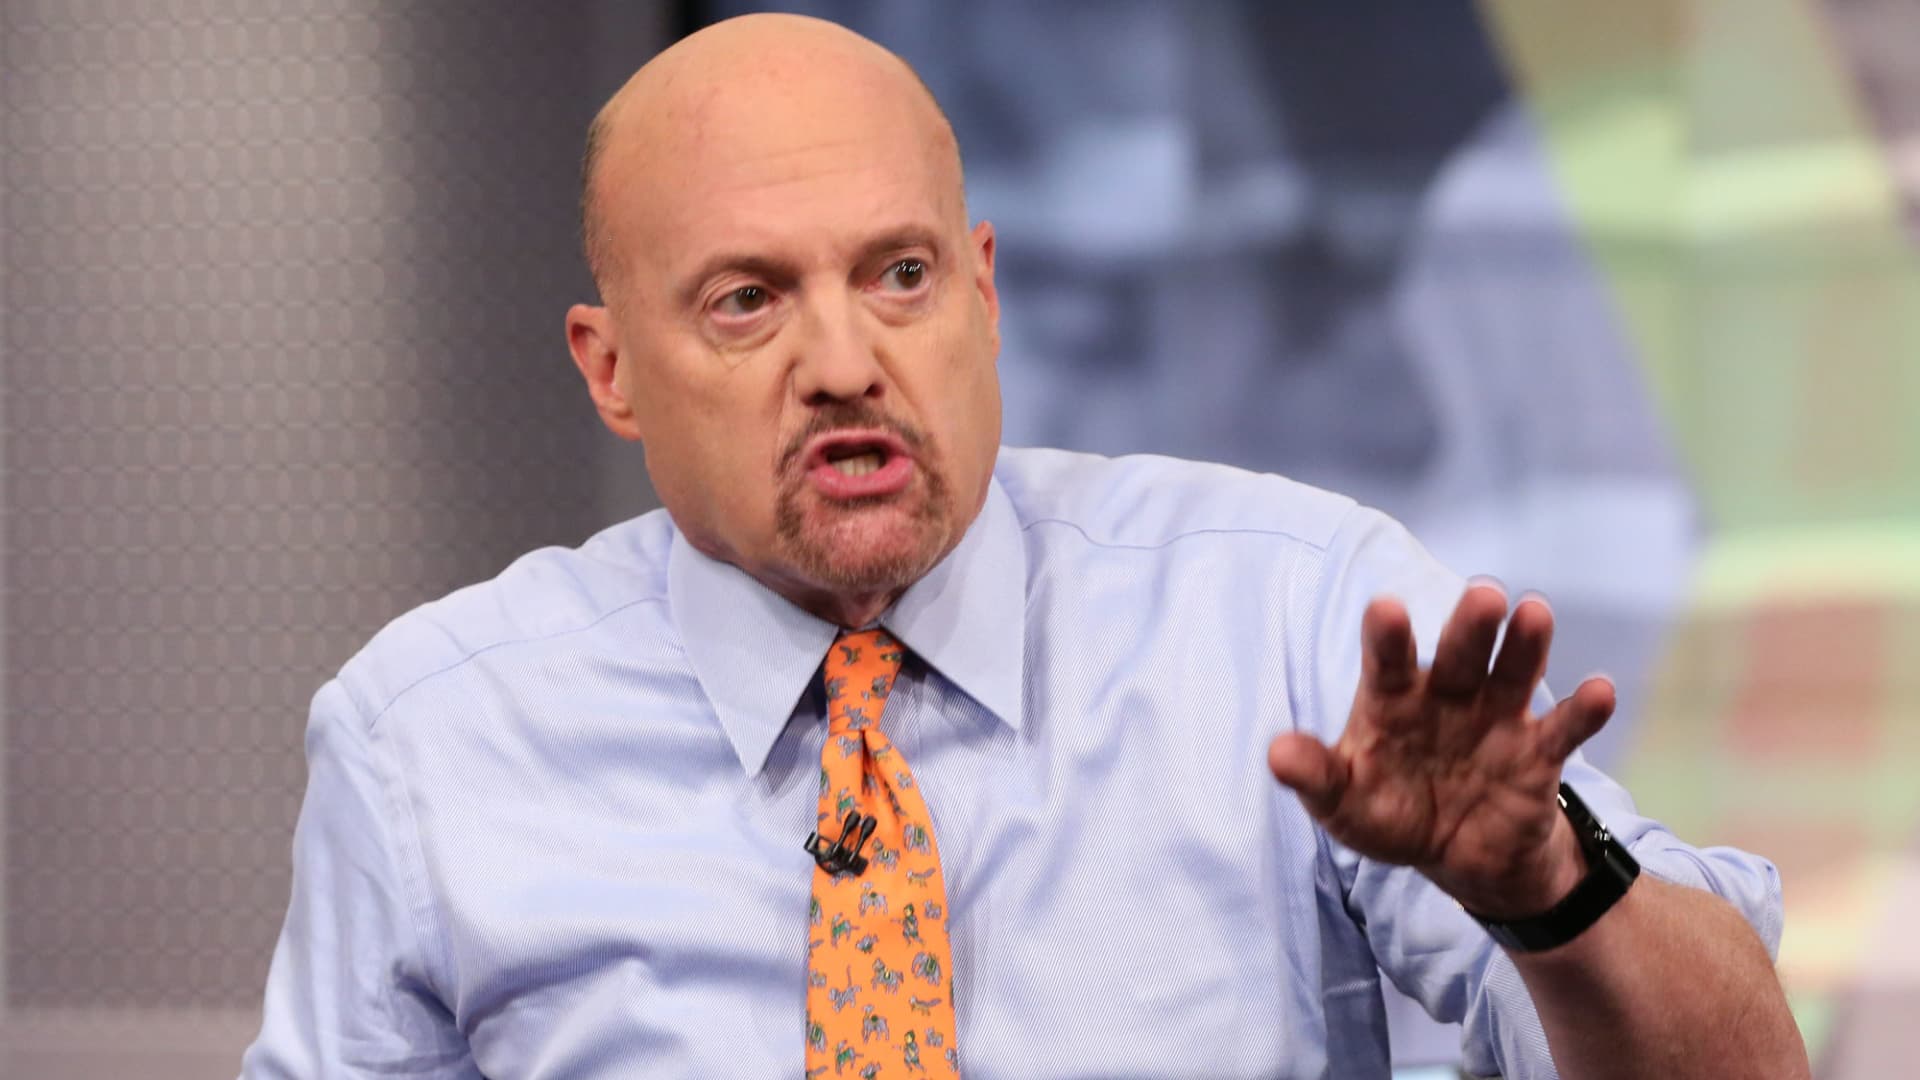 Jim Cramer says investors will be ‘rewarded’ when the Fed finishes hiking intere..